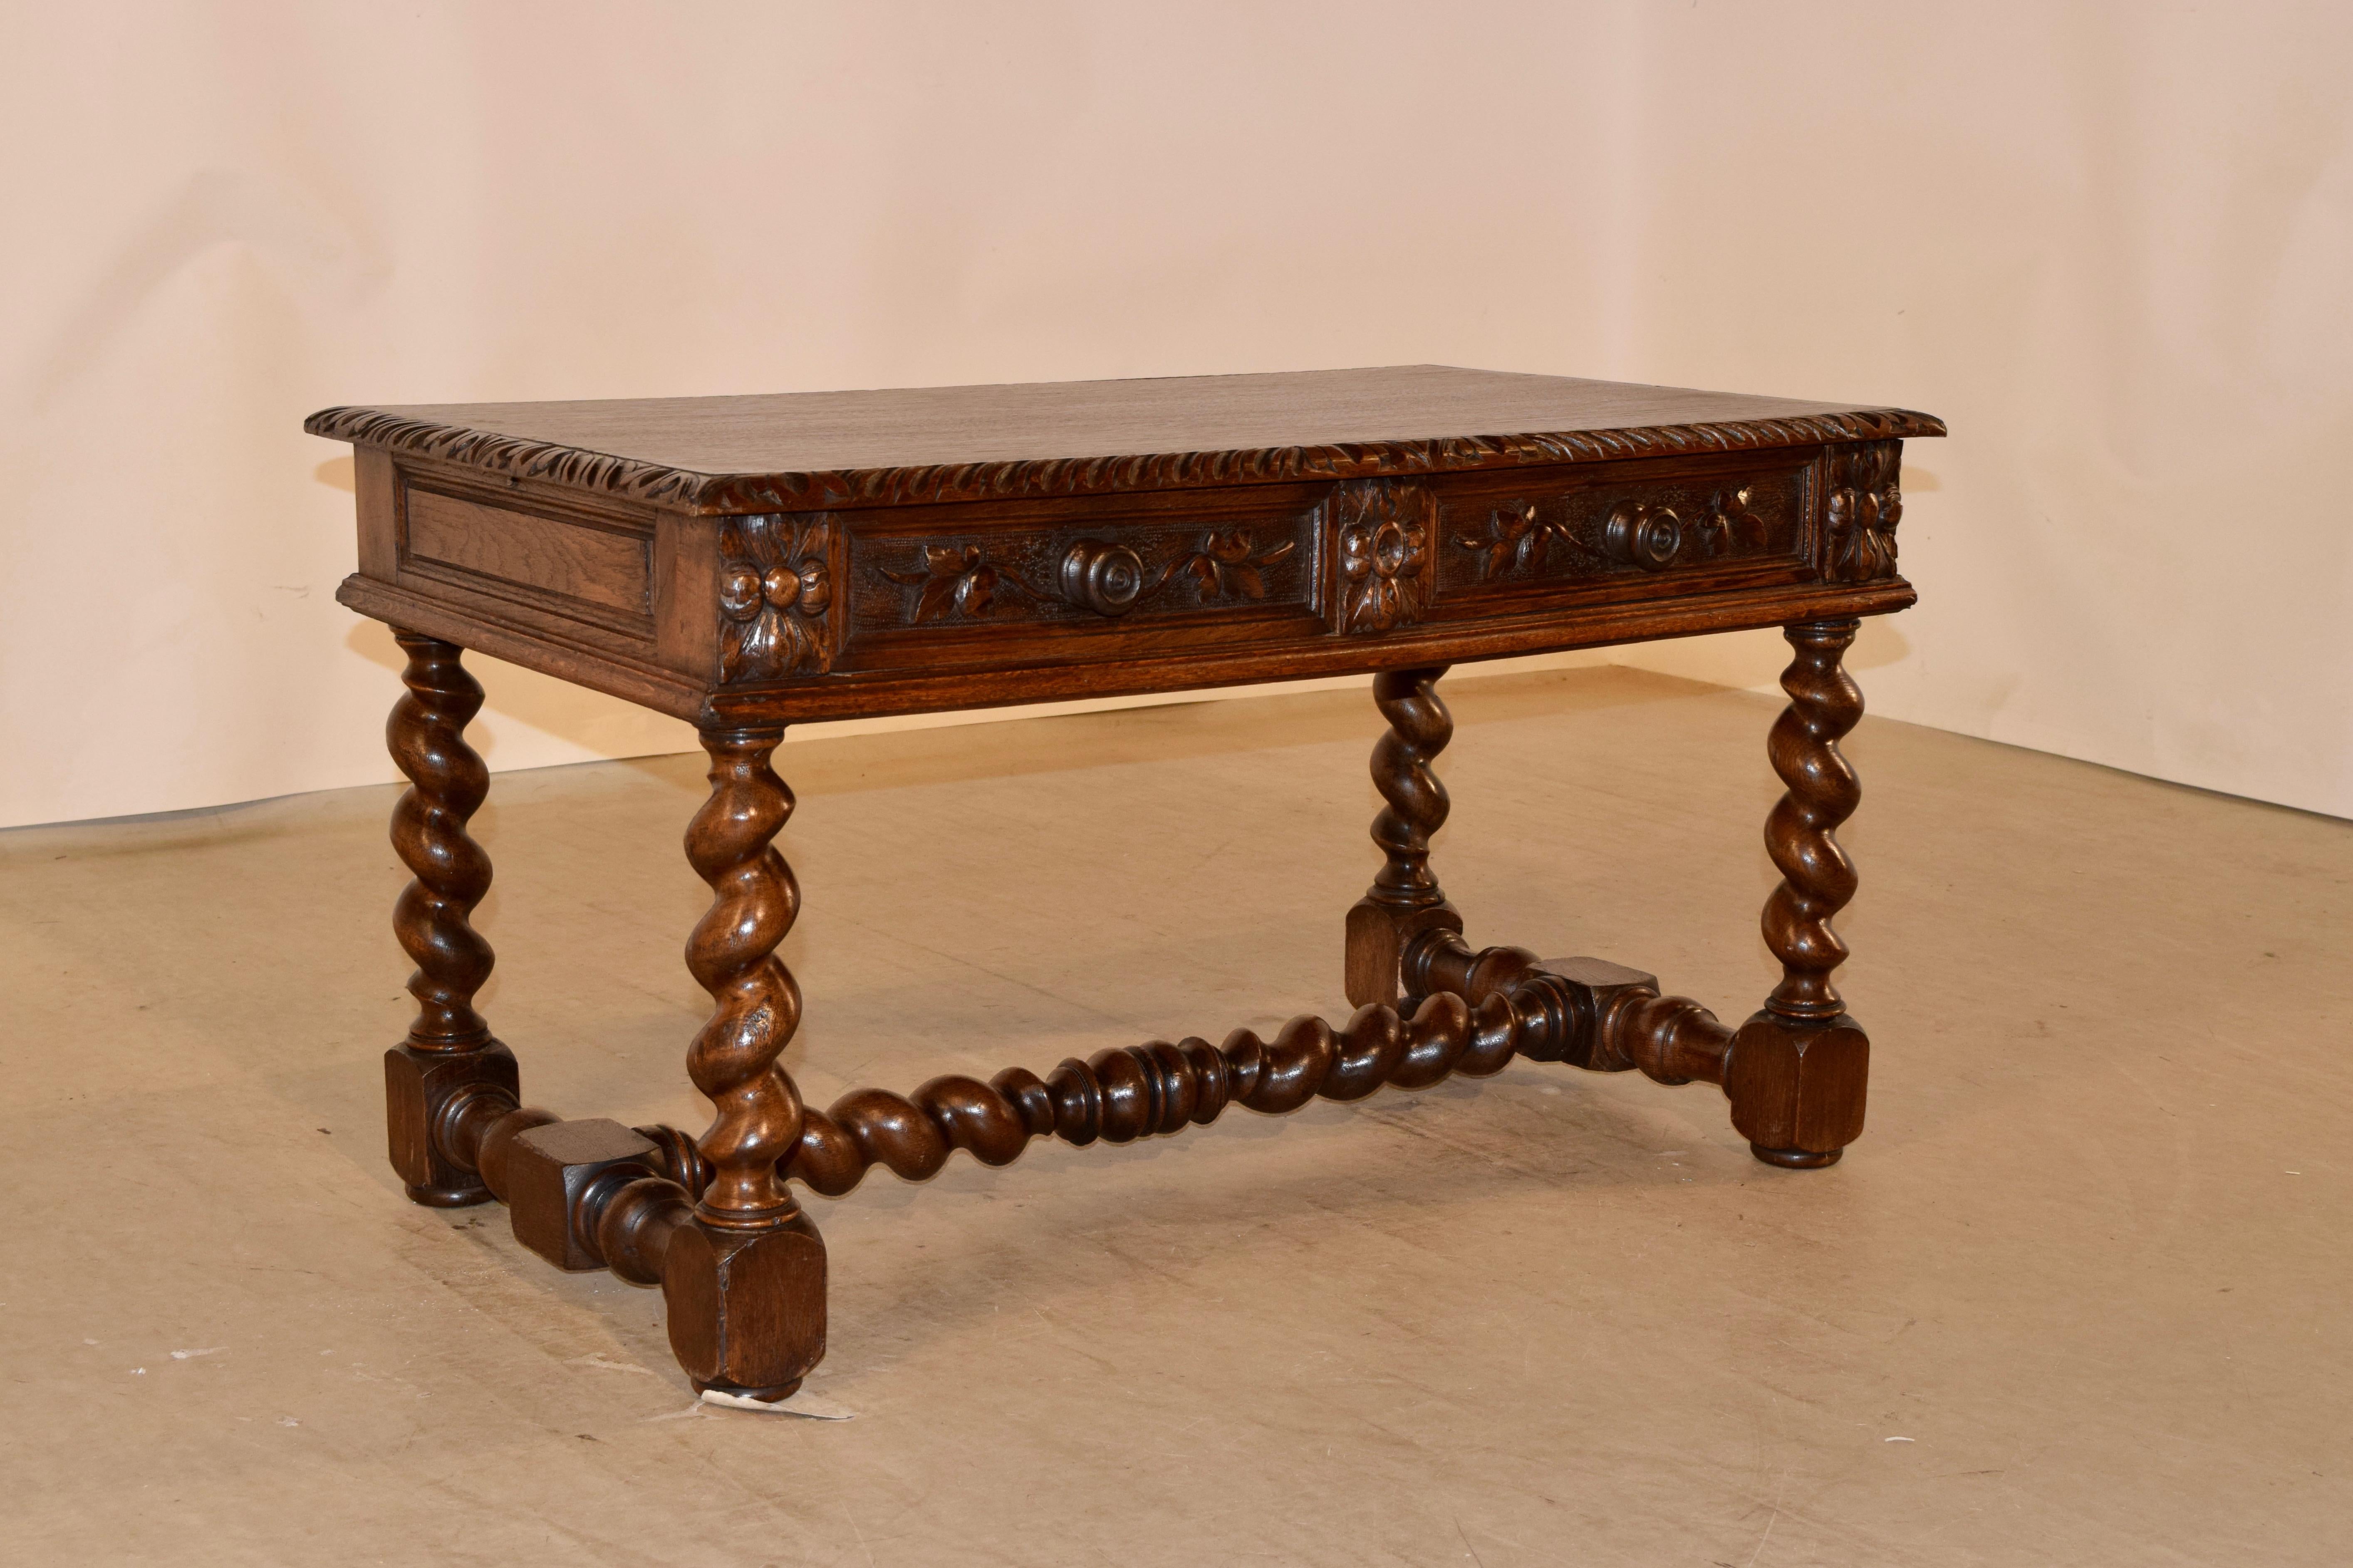 19th century coffee table from France made from oak. The top has a beveled and carved decorated edge around the top, following down to a paneled apron on the sides and two drawers with molded edges and carved decoration in the front, over